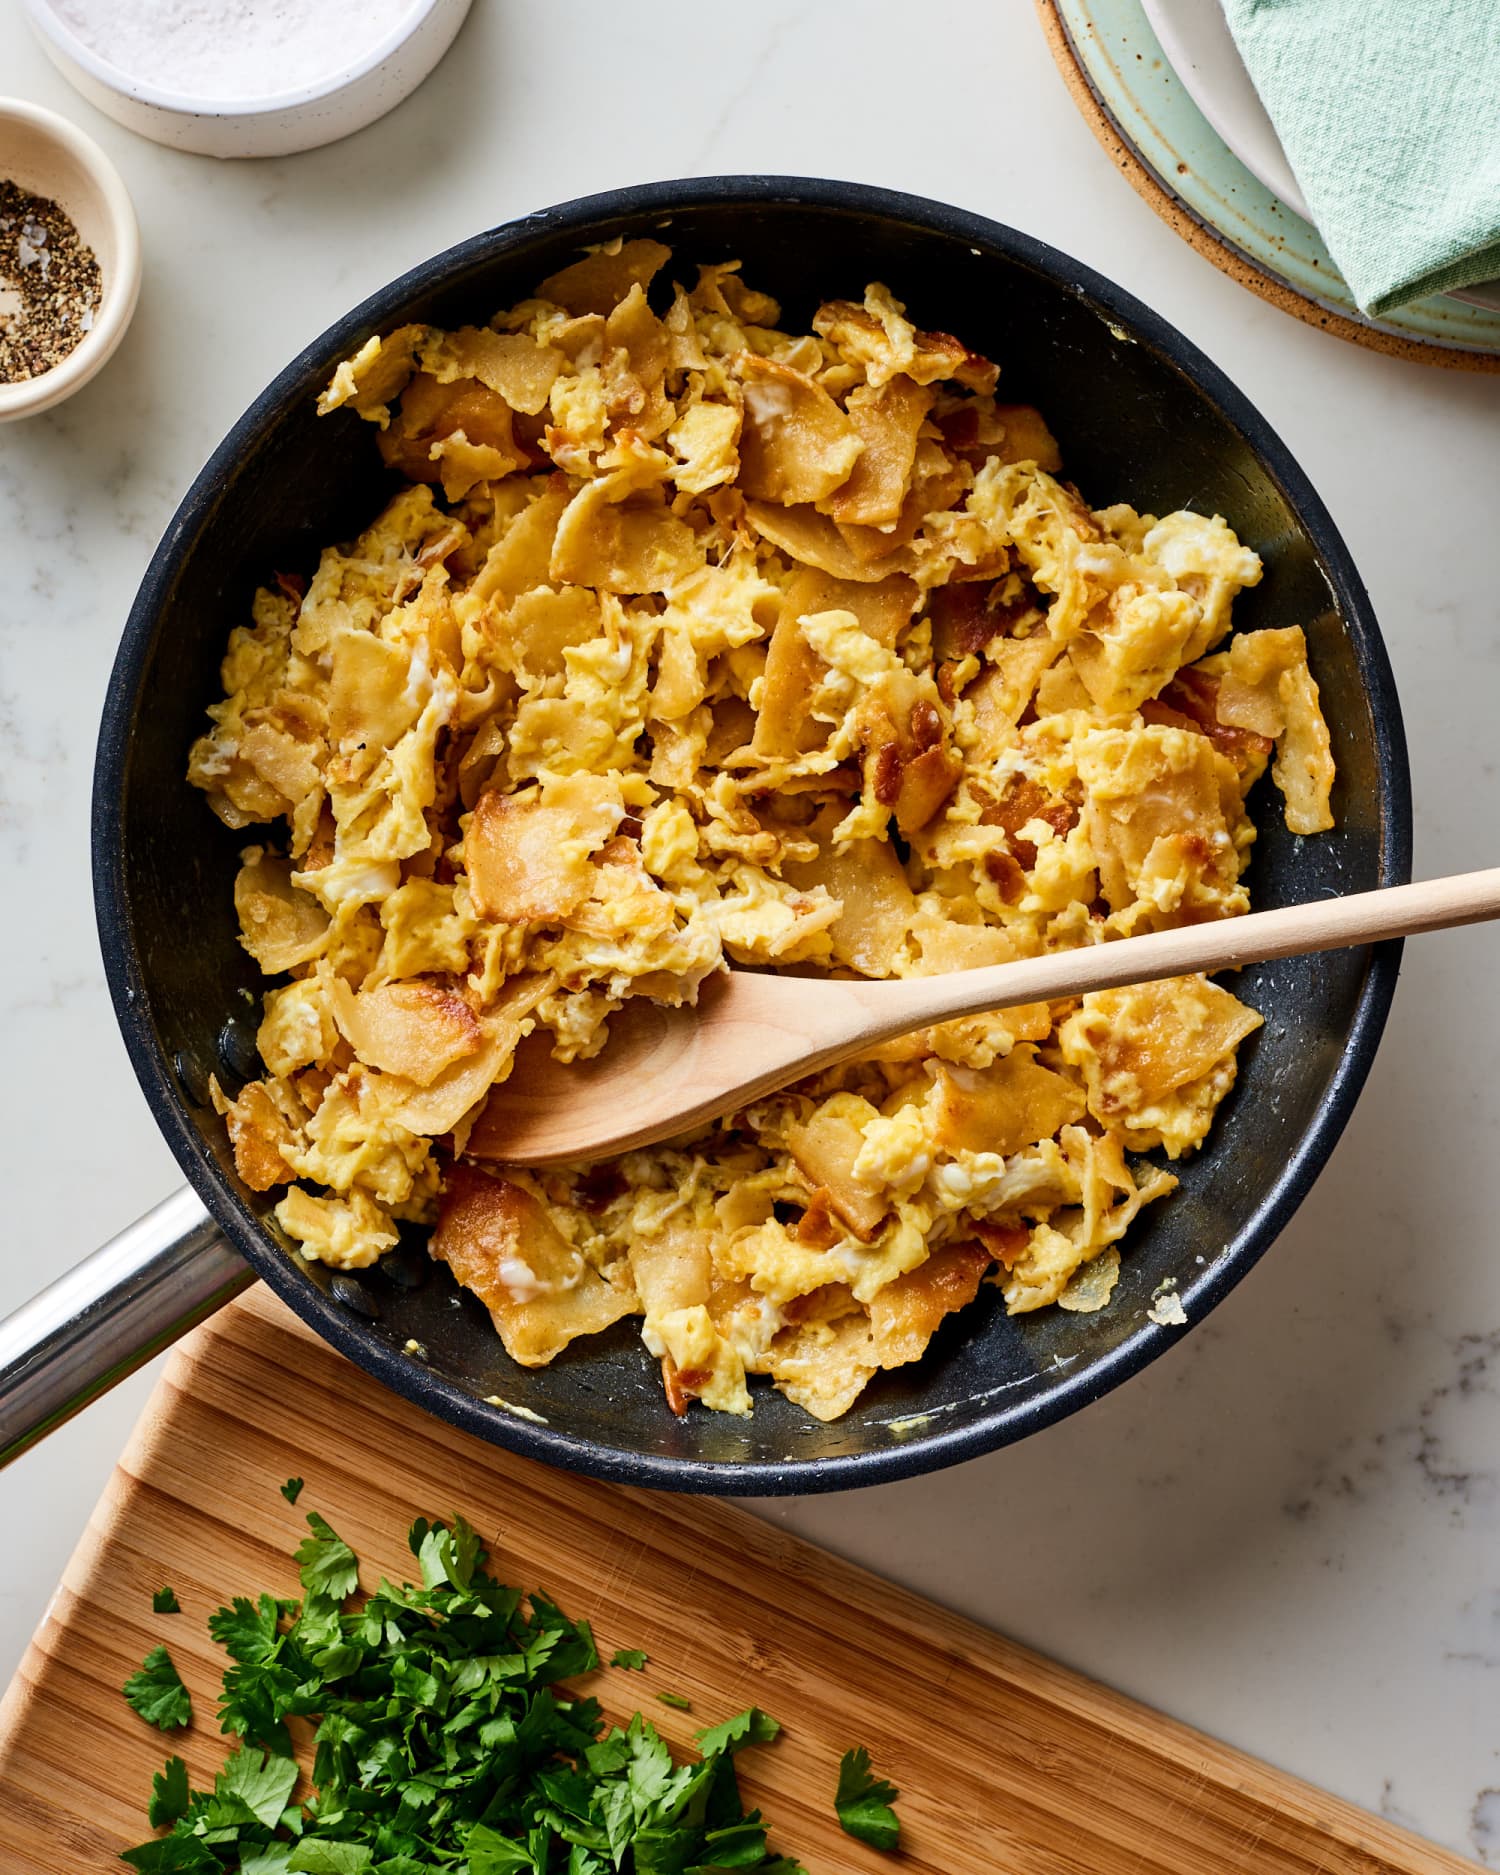 For Better Scrambled Eggs, Make Them the Mexican Way